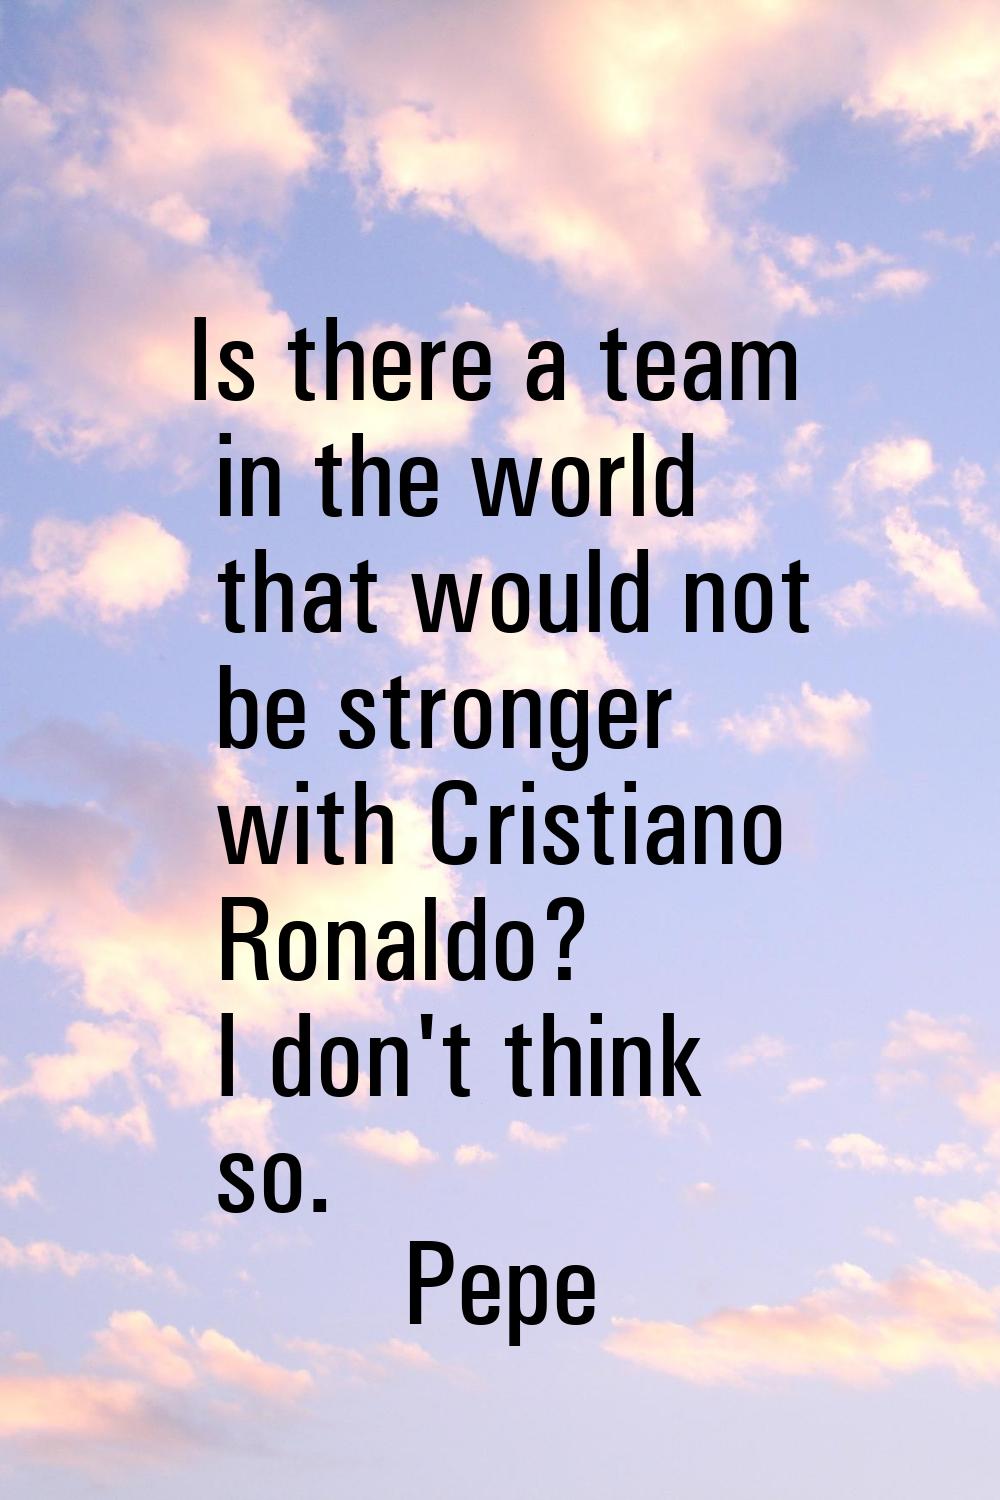 Is there a team in the world that would not be stronger with Cristiano Ronaldo? I don't think so.